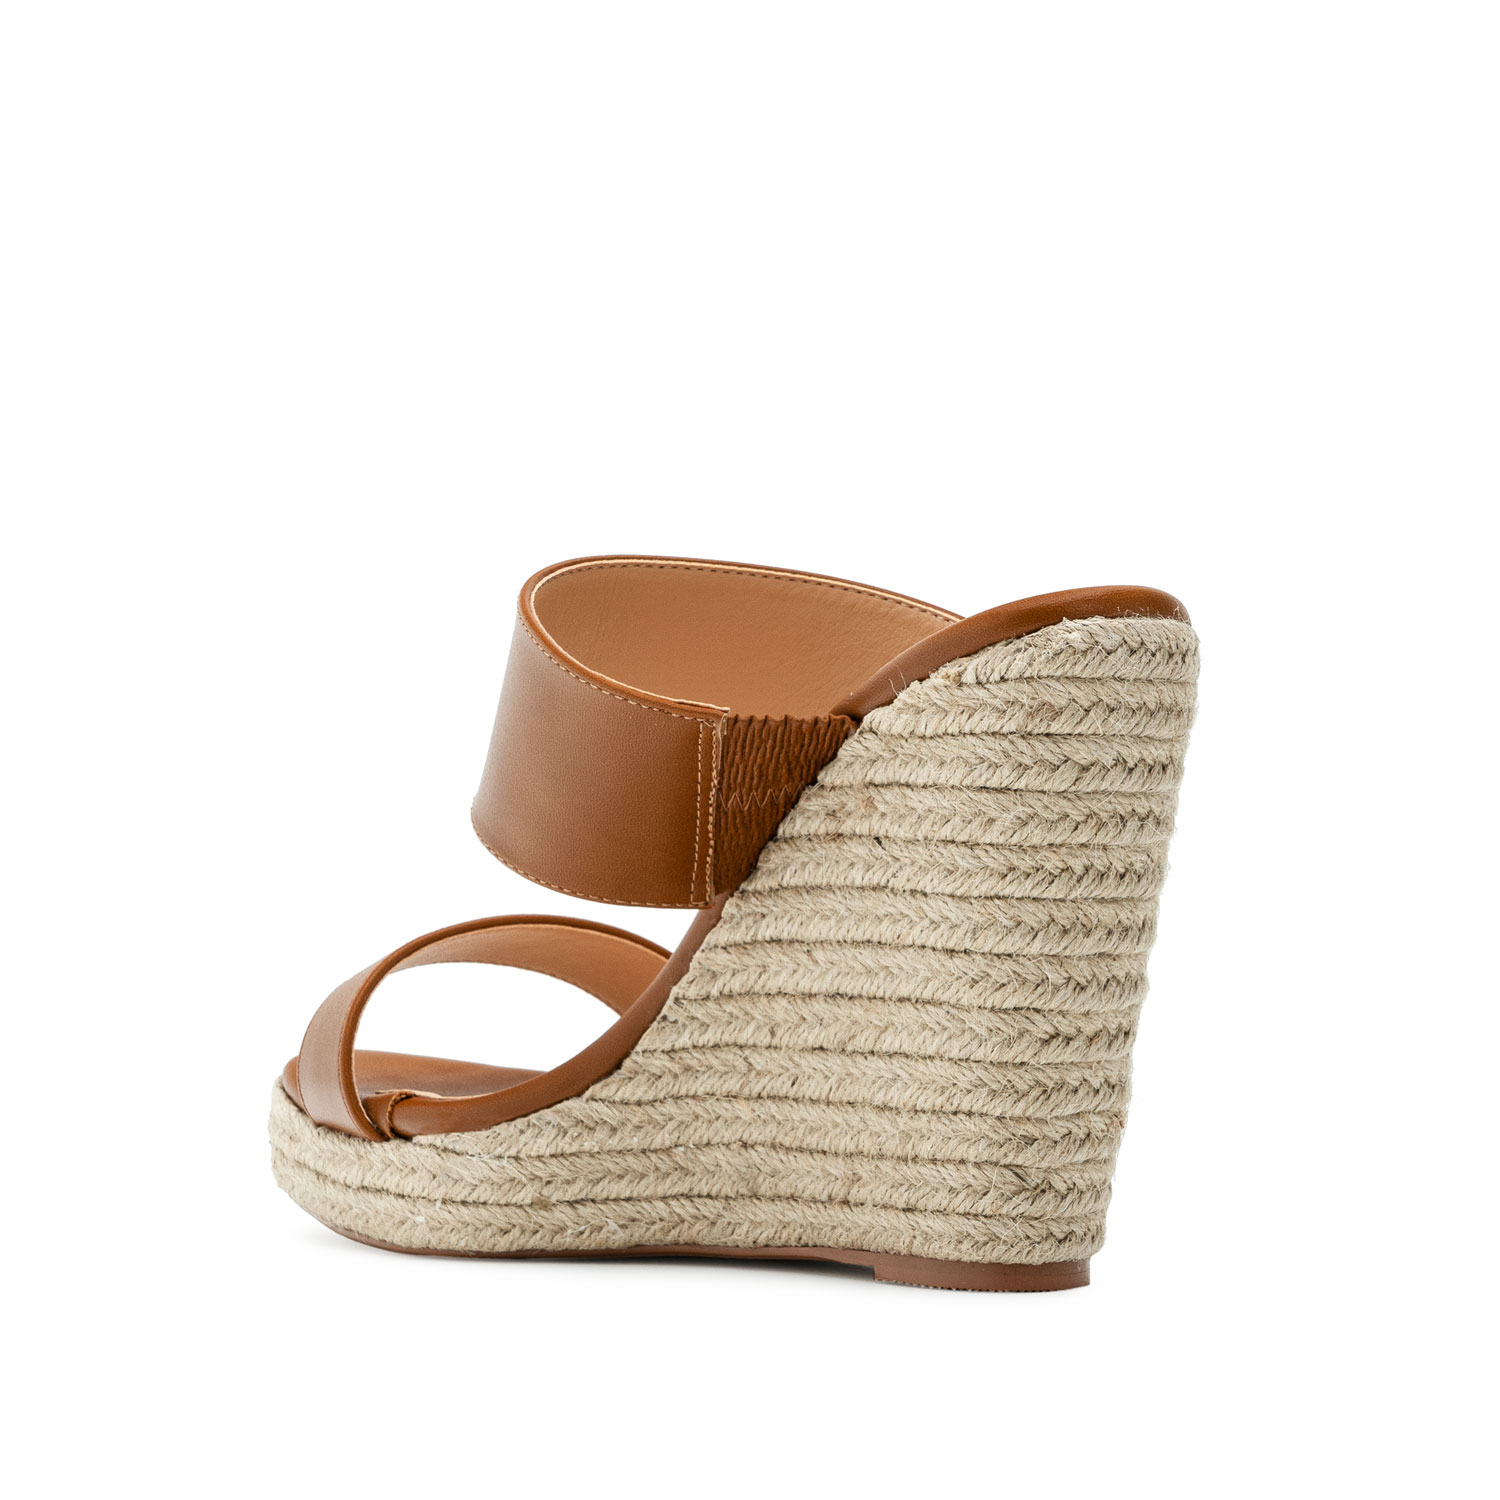 Jute Wedges in Camel-coloured faux Leather 